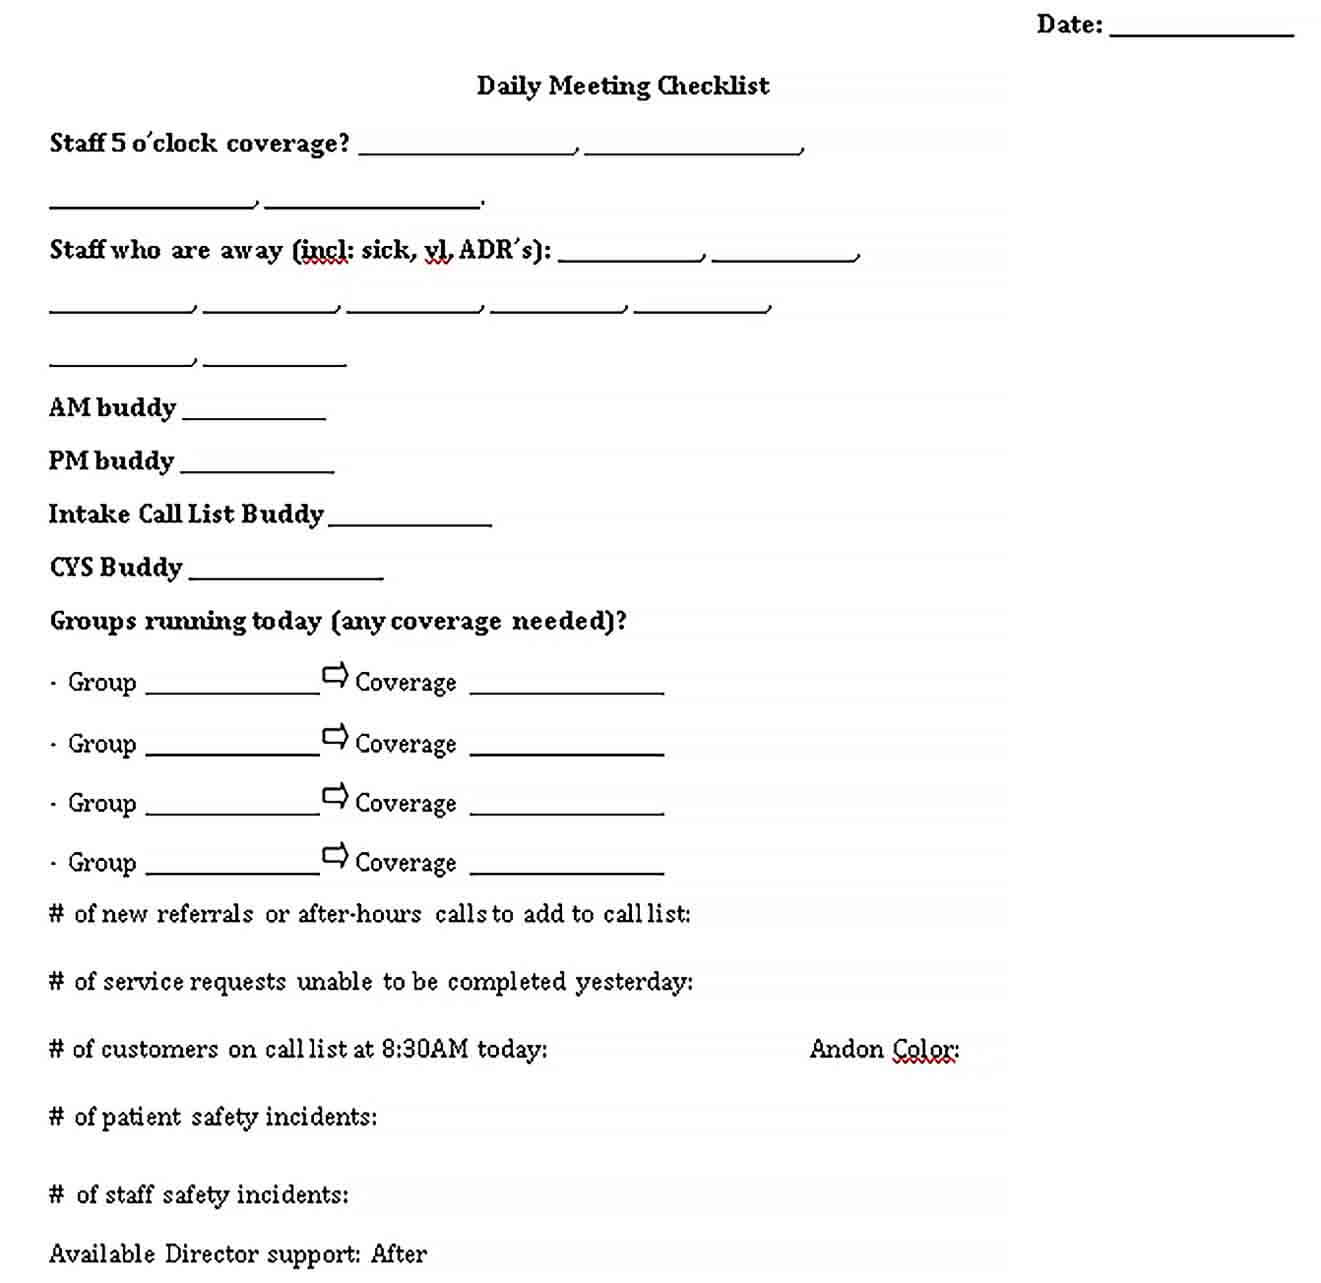 Sample Daily Meeting Checklist Template 1